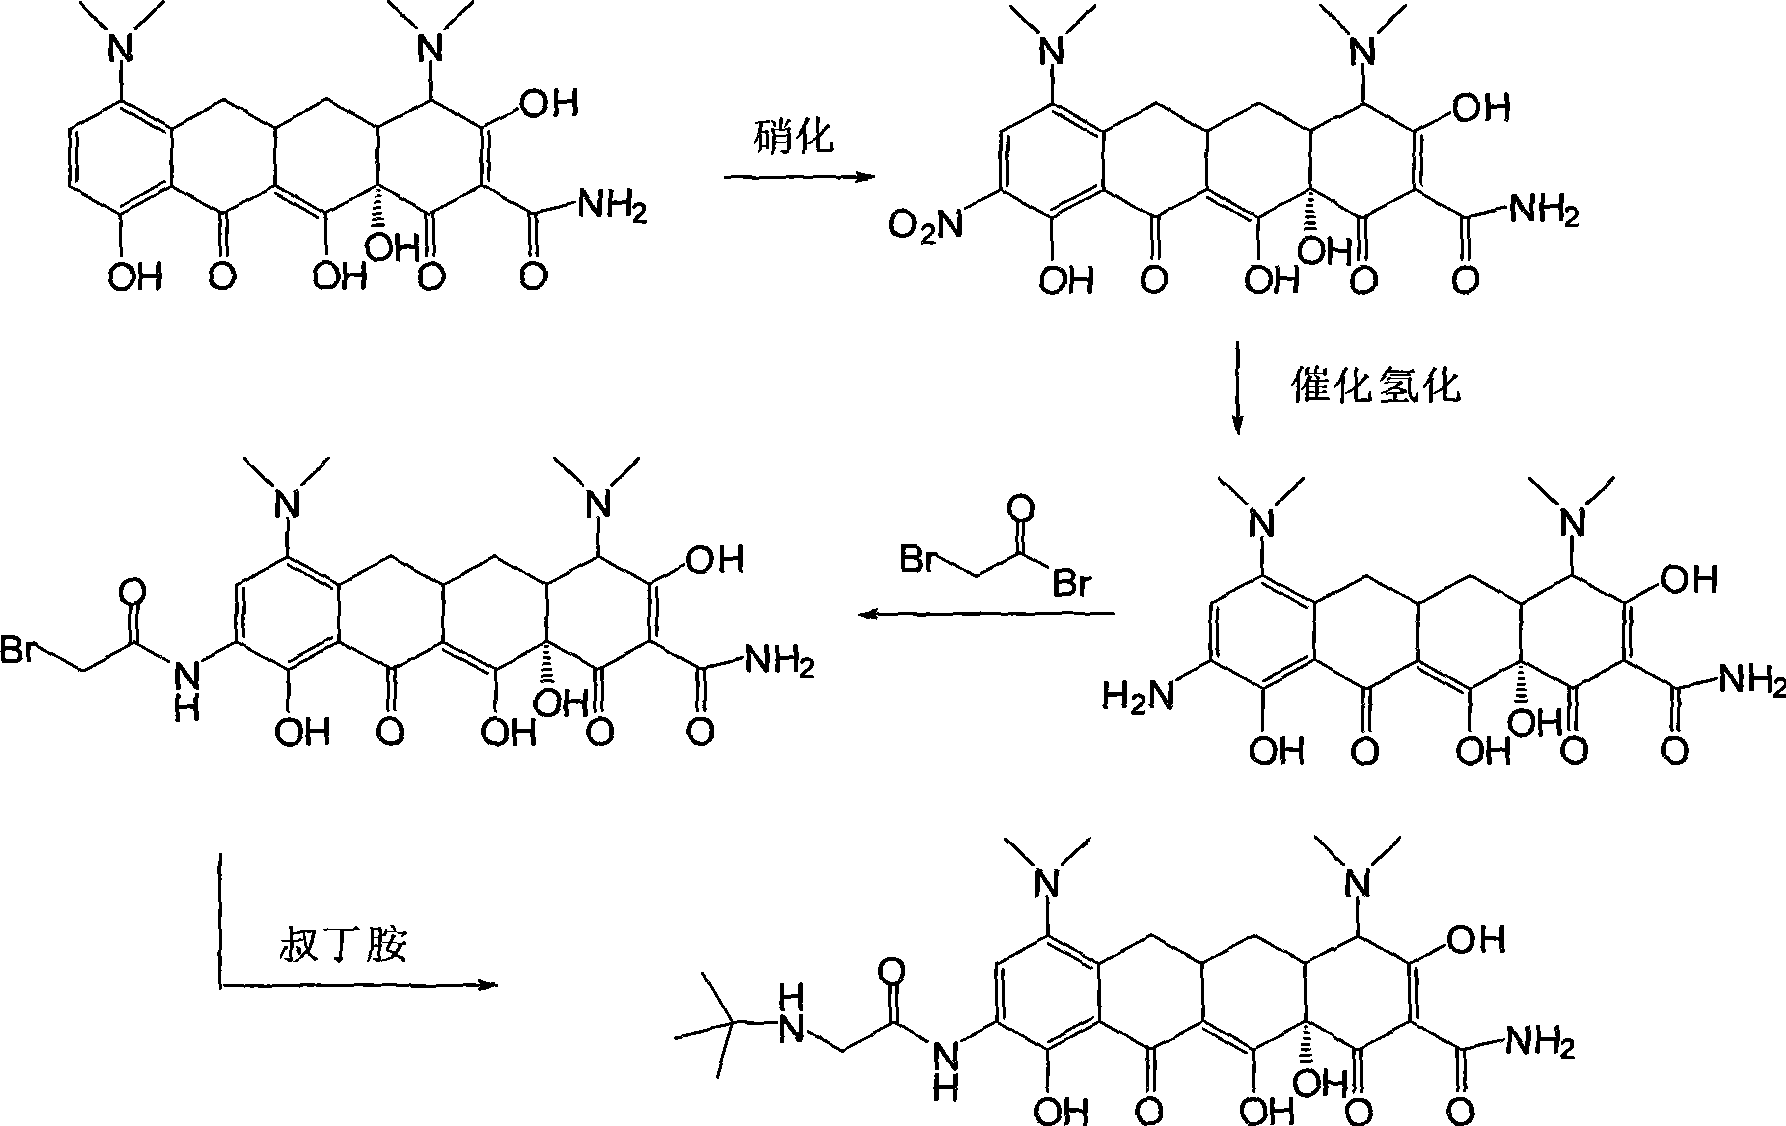 Synthetic method of tigecycline